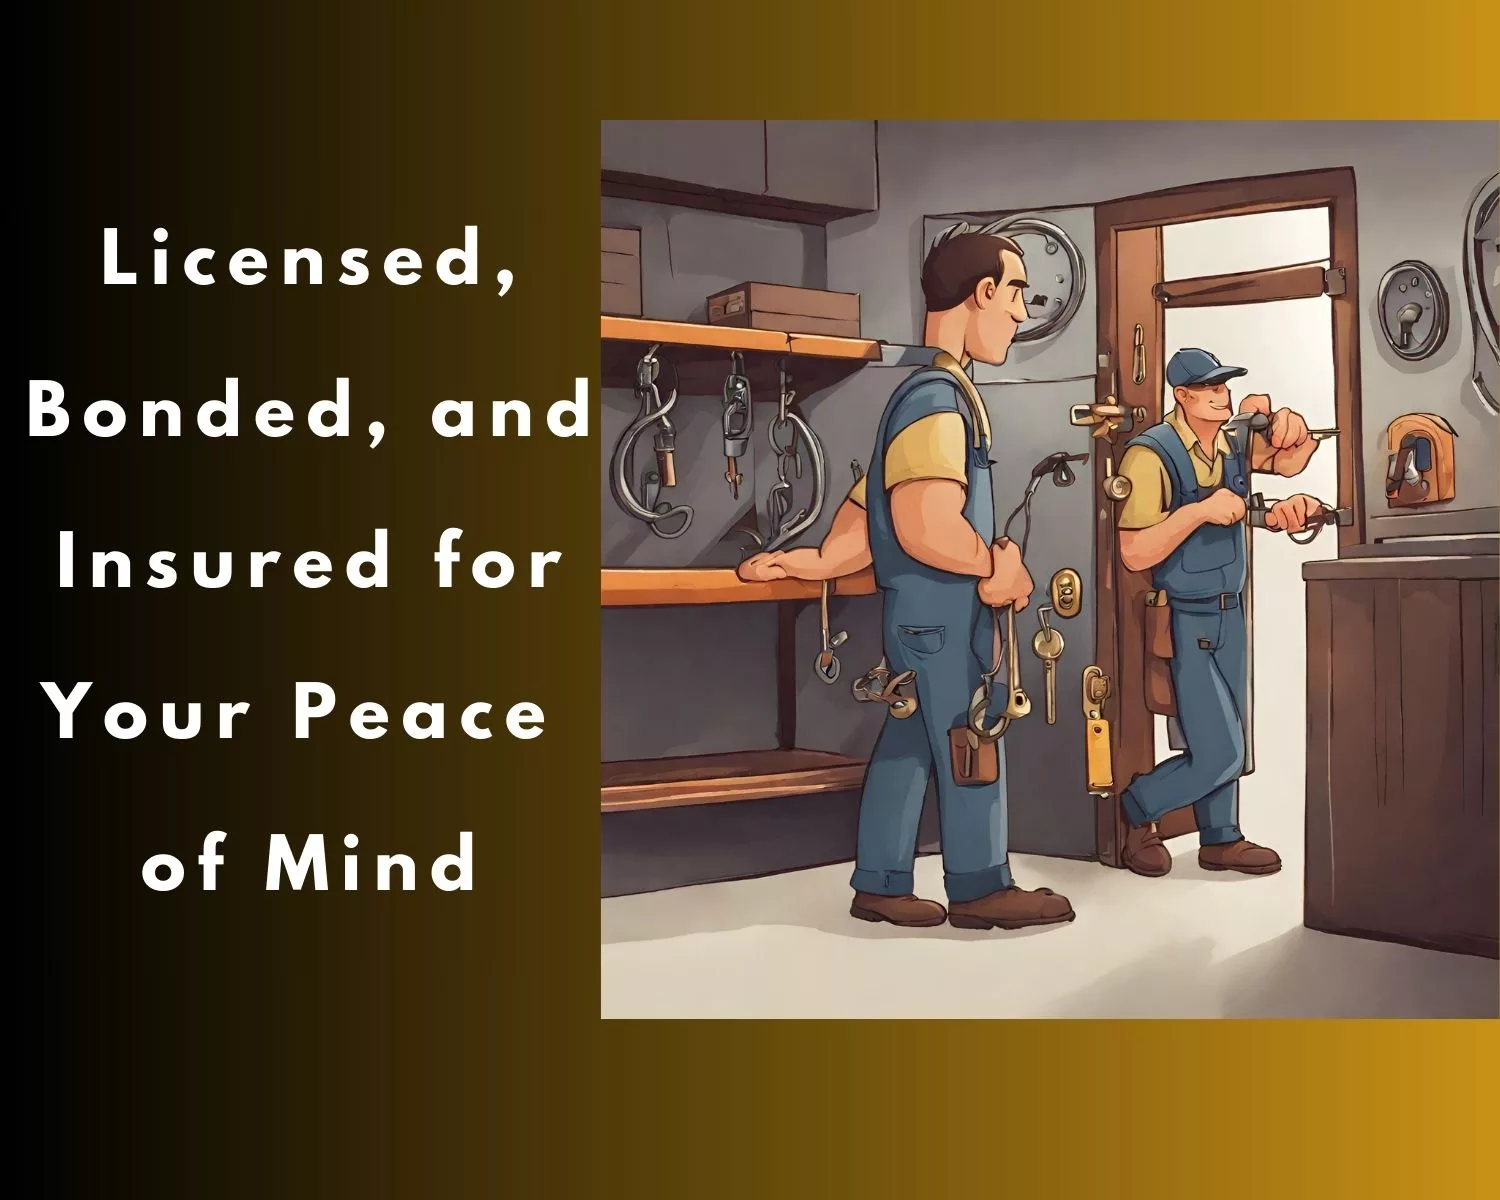 Licensed, Bonded, and Insured for Your Peace of Mind